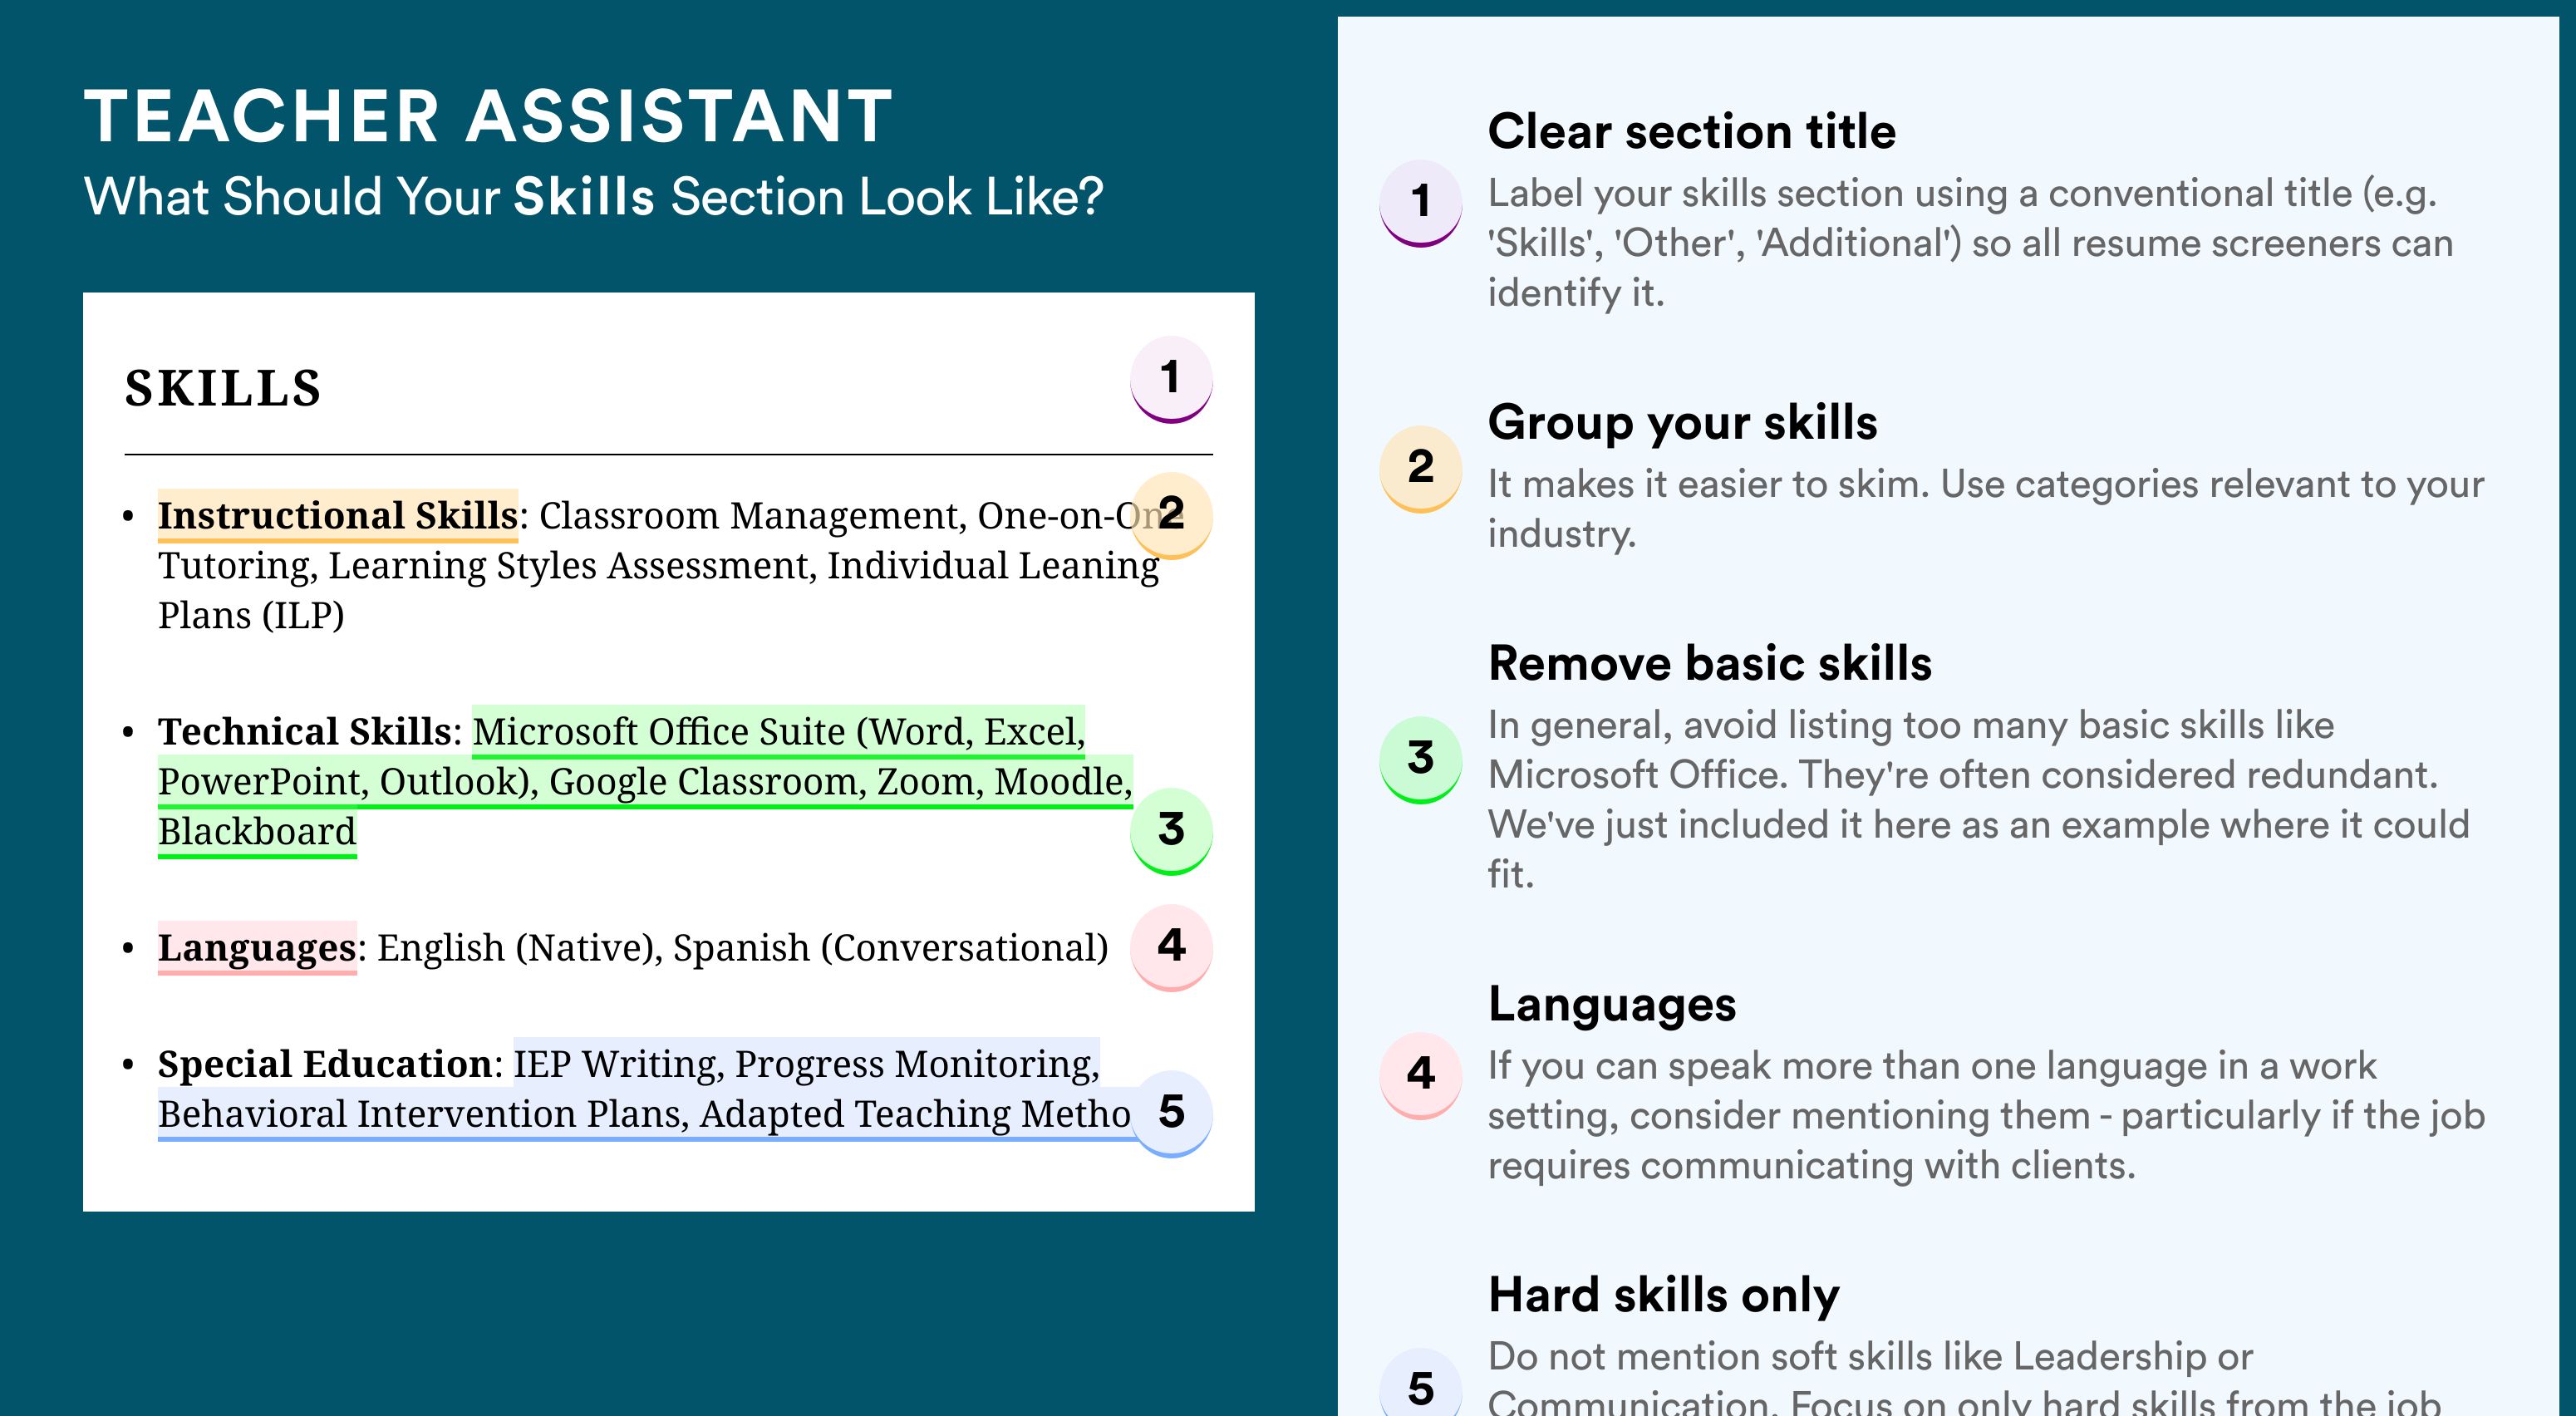 How To Write Your Skills Section - Teacher Assistant Roles